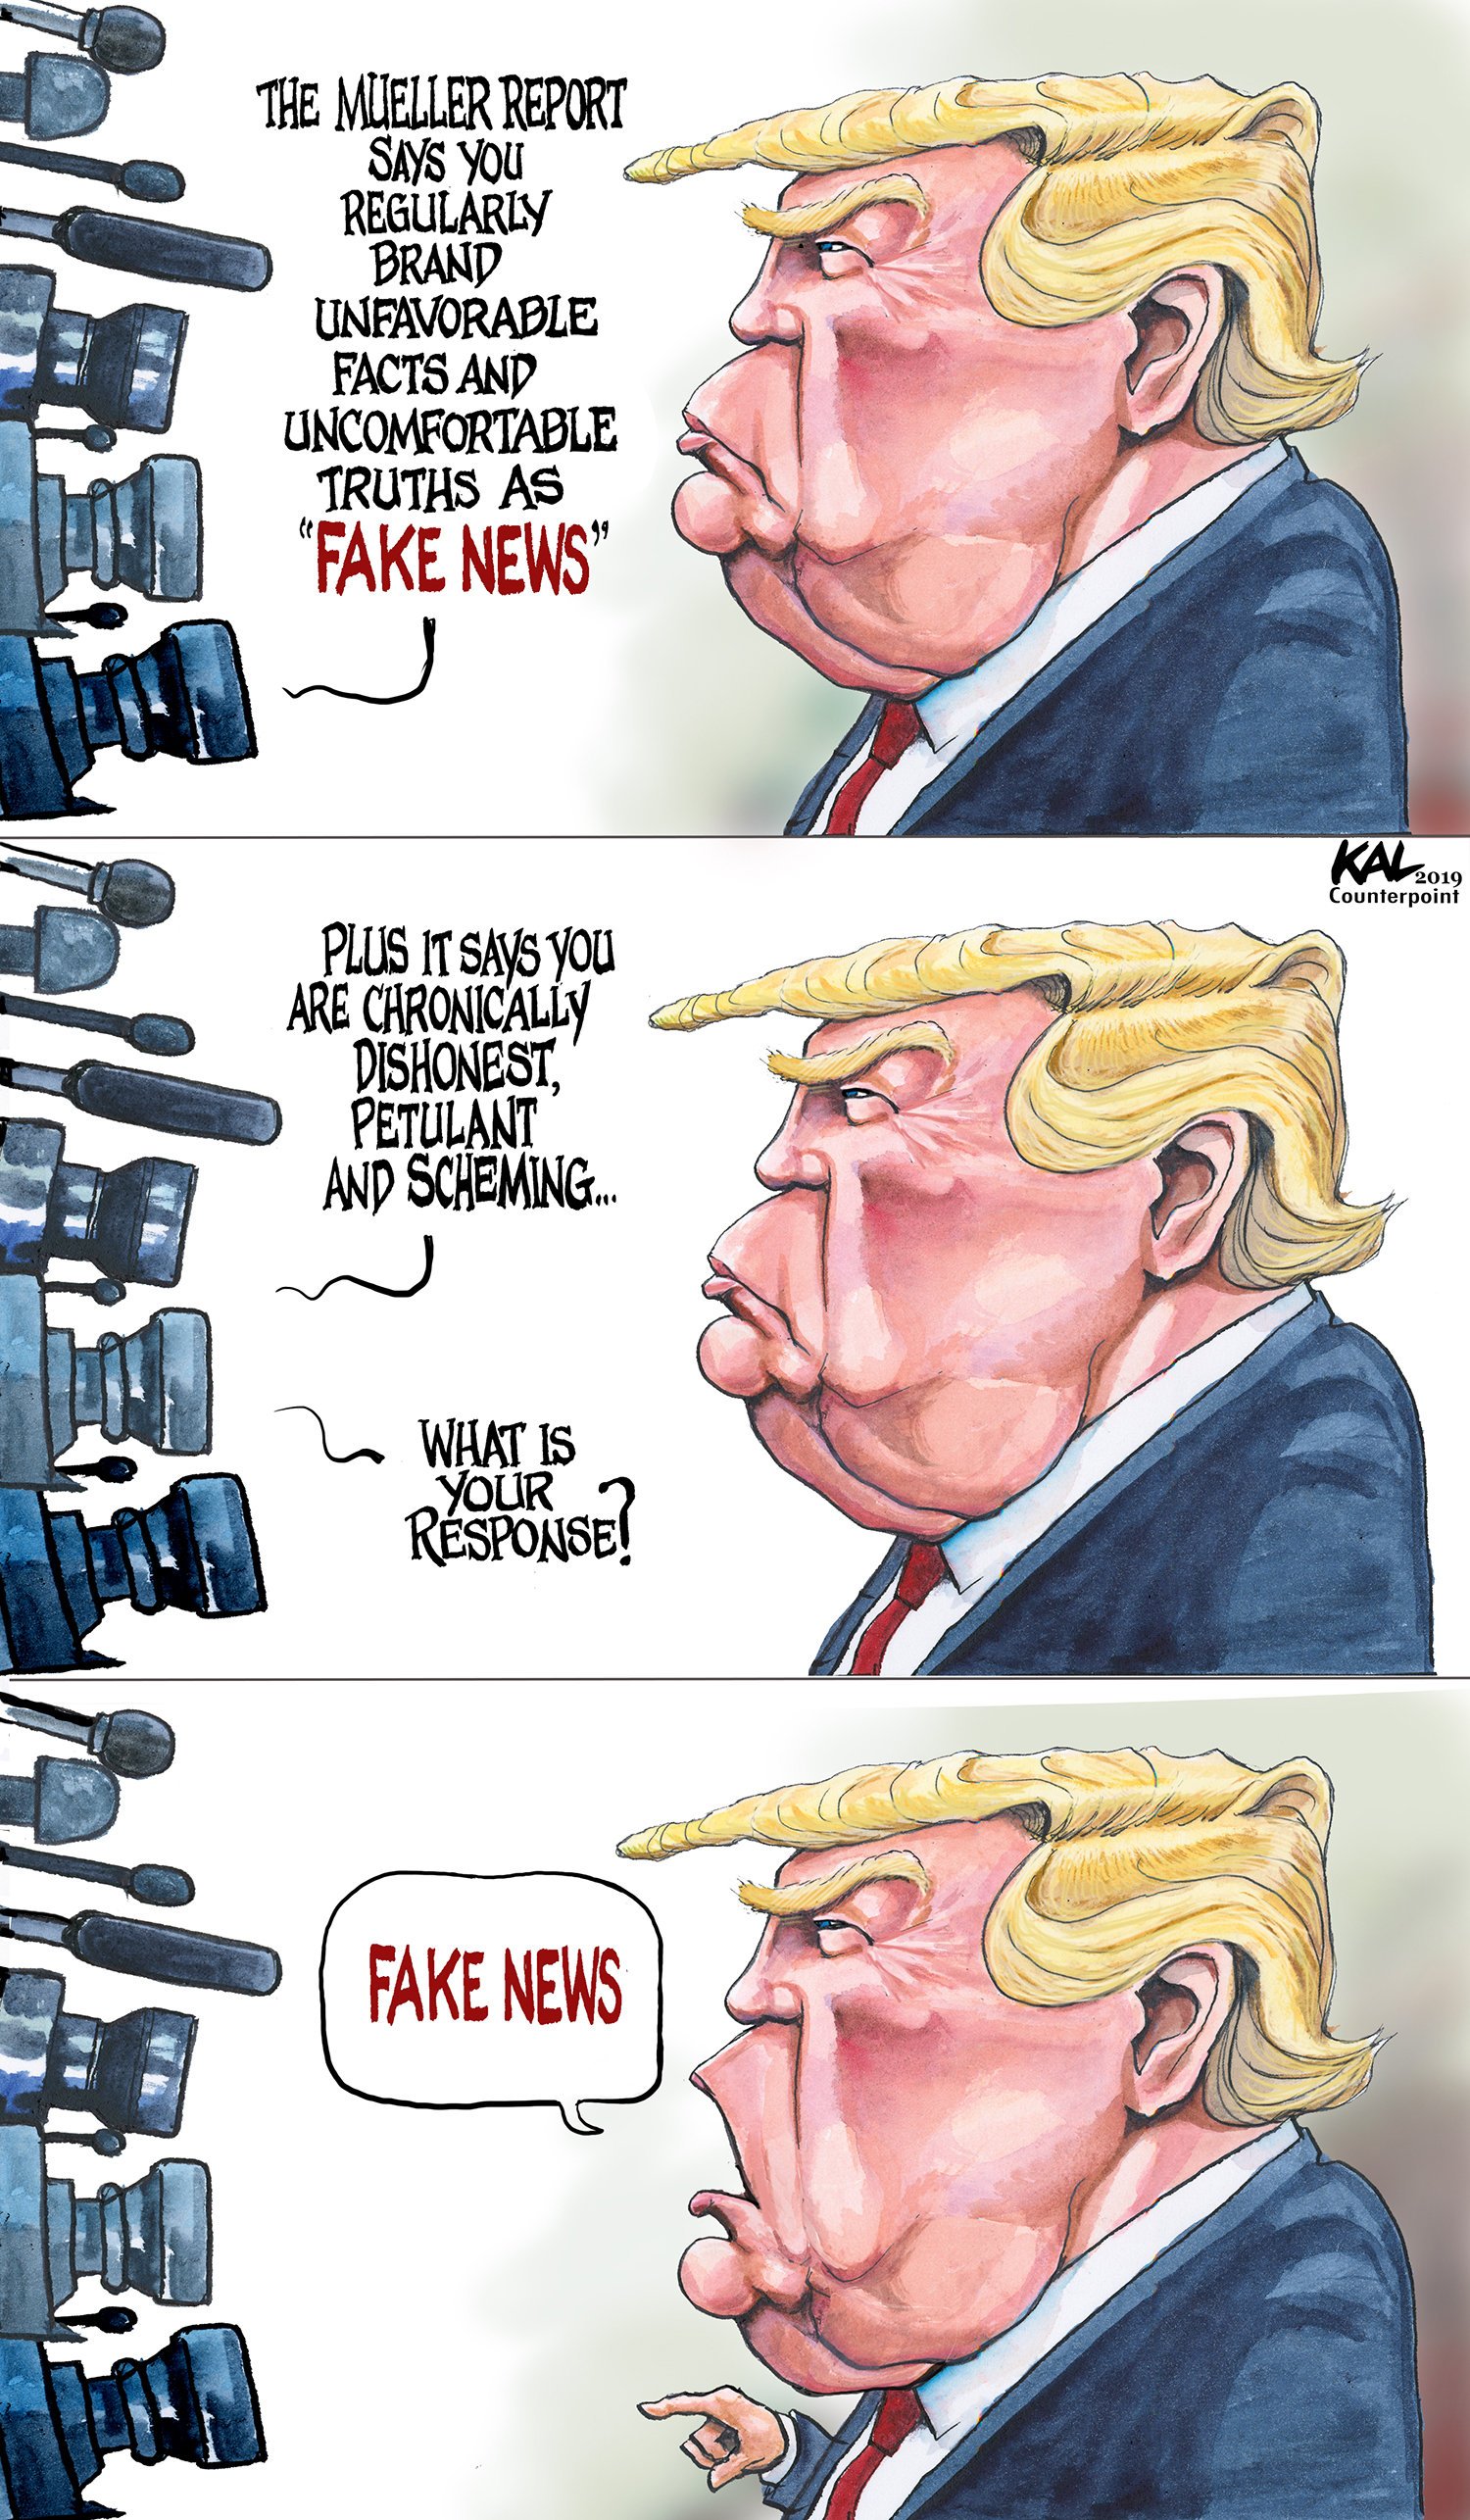 cartoon - The Moeller Report Says You Regularly Brand Unfavorable Facts And Uncomfortable Truths As "Fake News" Kal Plus It Says You Are Cronically Dishonest Petulant And Scheming Wutis Fake News